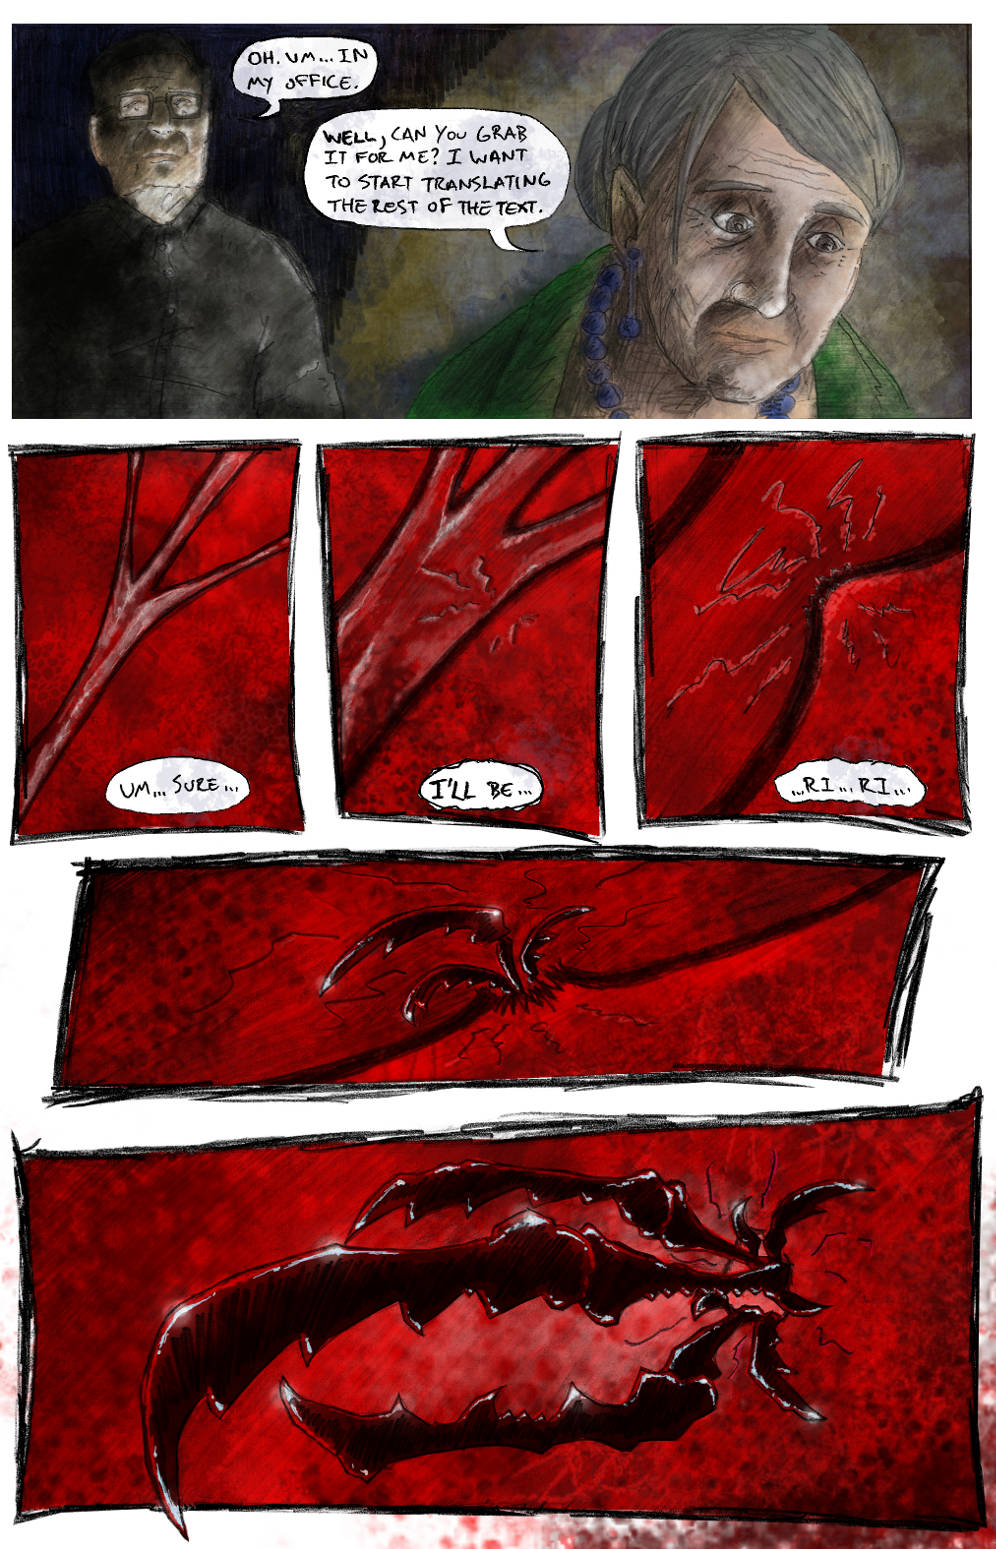 Page 24. Please enable images to read the comics :)